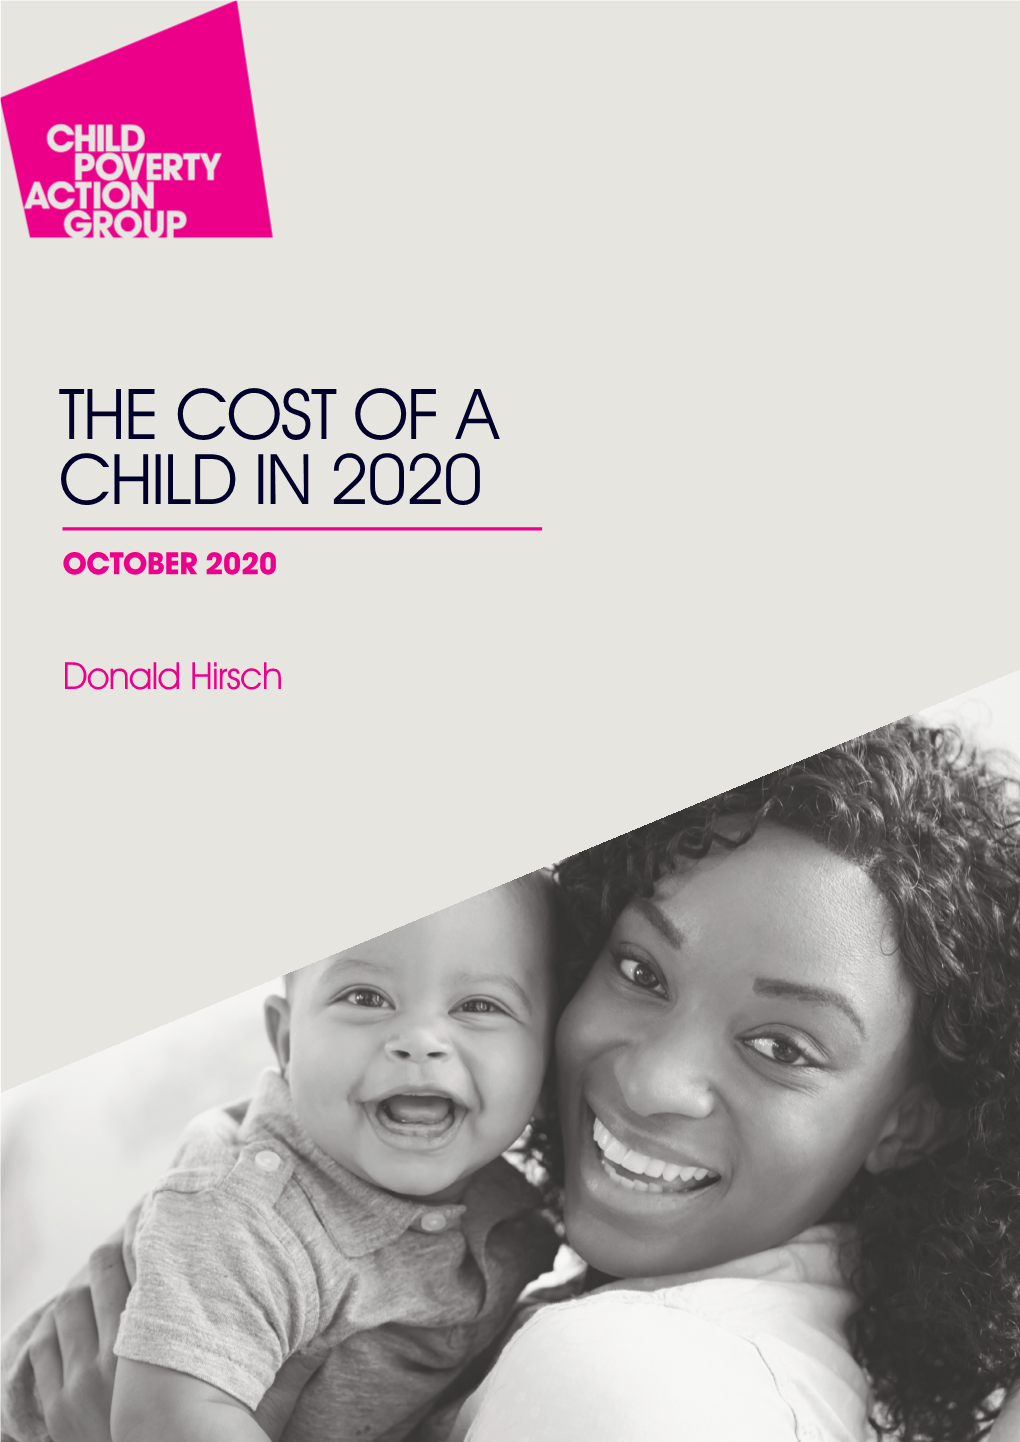 The Cost of a Child in 2020